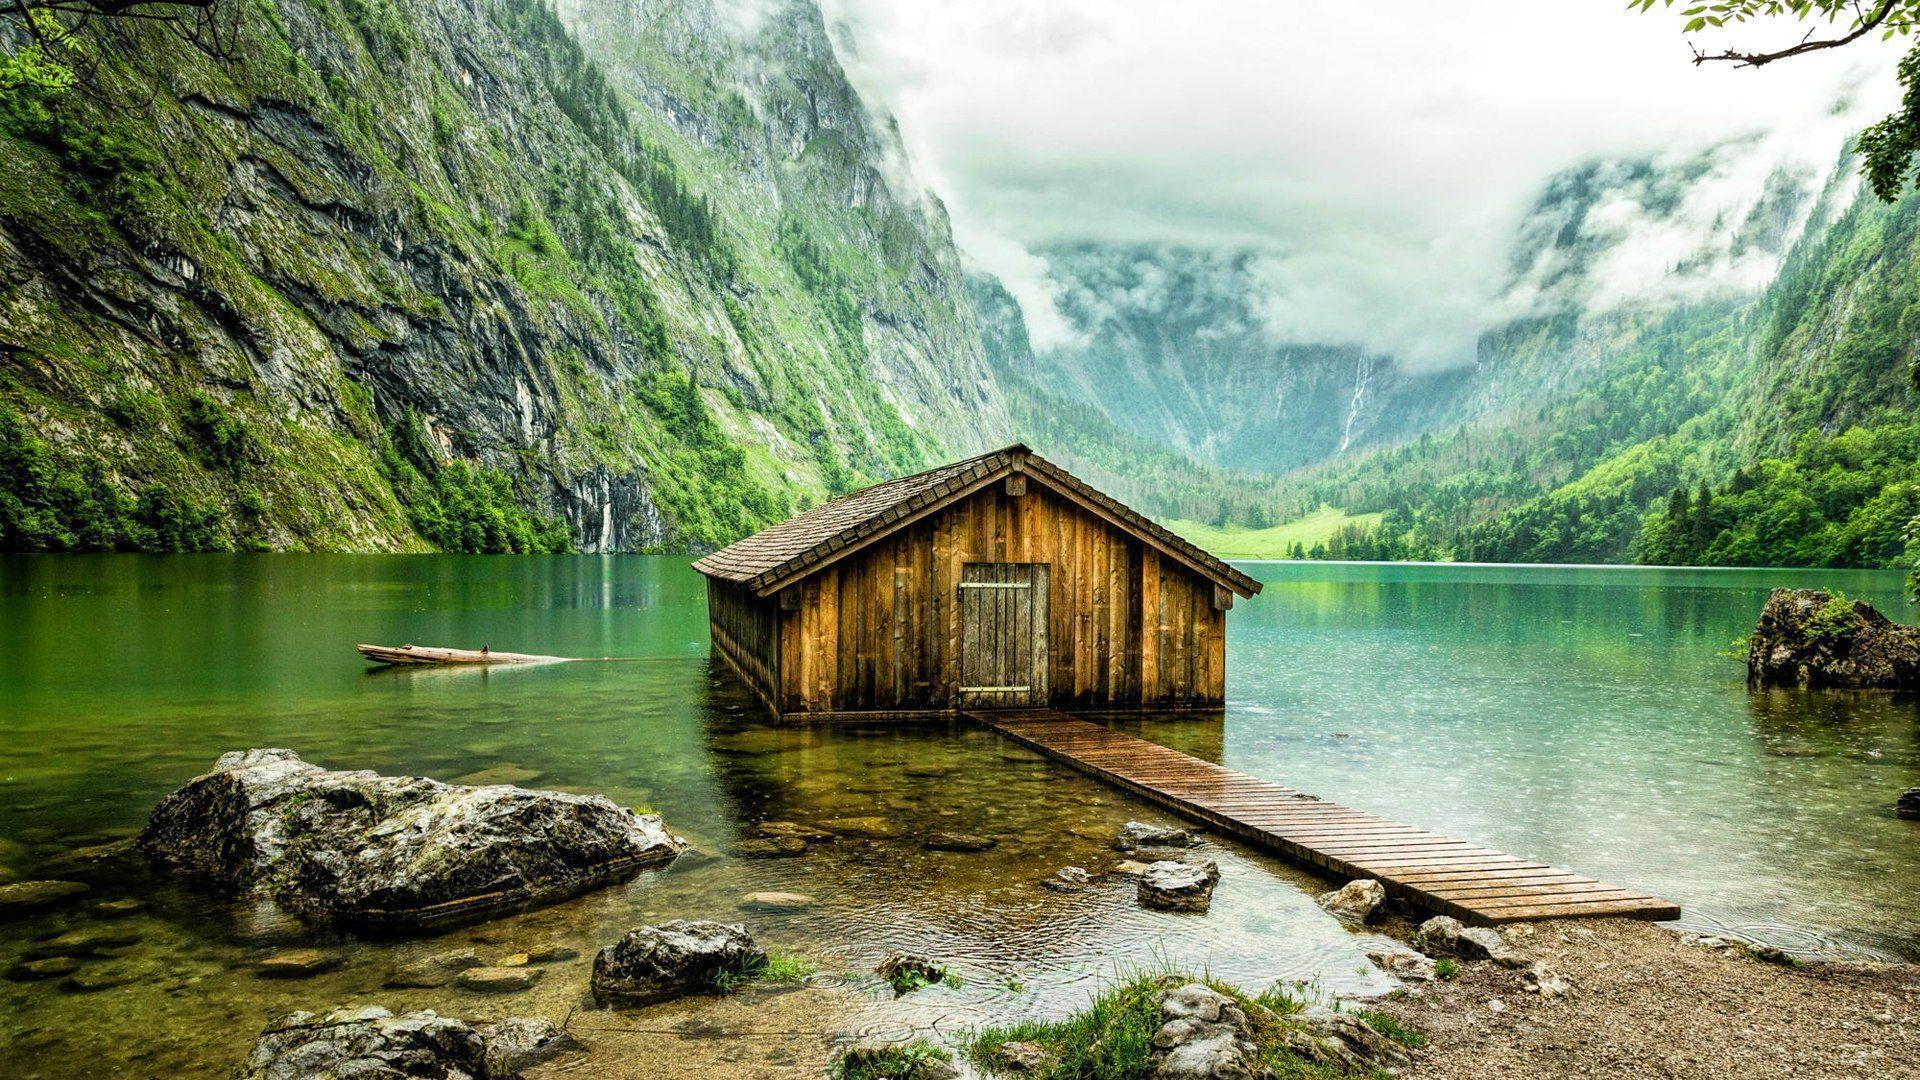 Obersee lake in Bavaria, Germany wallpaper and image